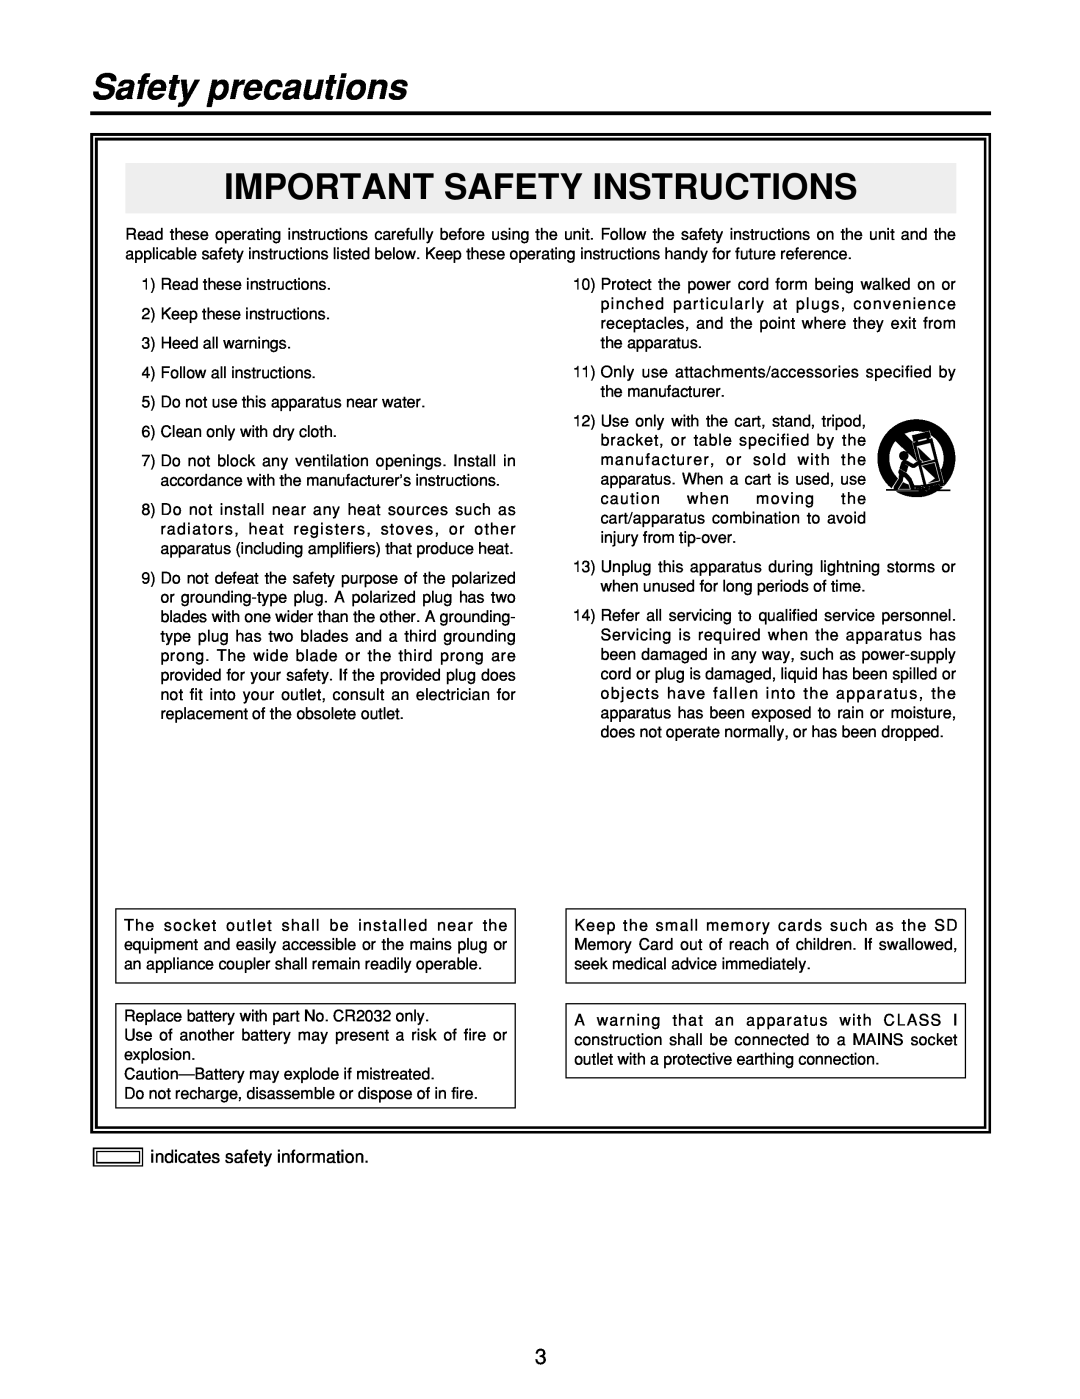 Panasonic AW-RP400, AW-PH400, AW-RL400 manual Safety precautions, Important Safety Instructions, indicates safety information 